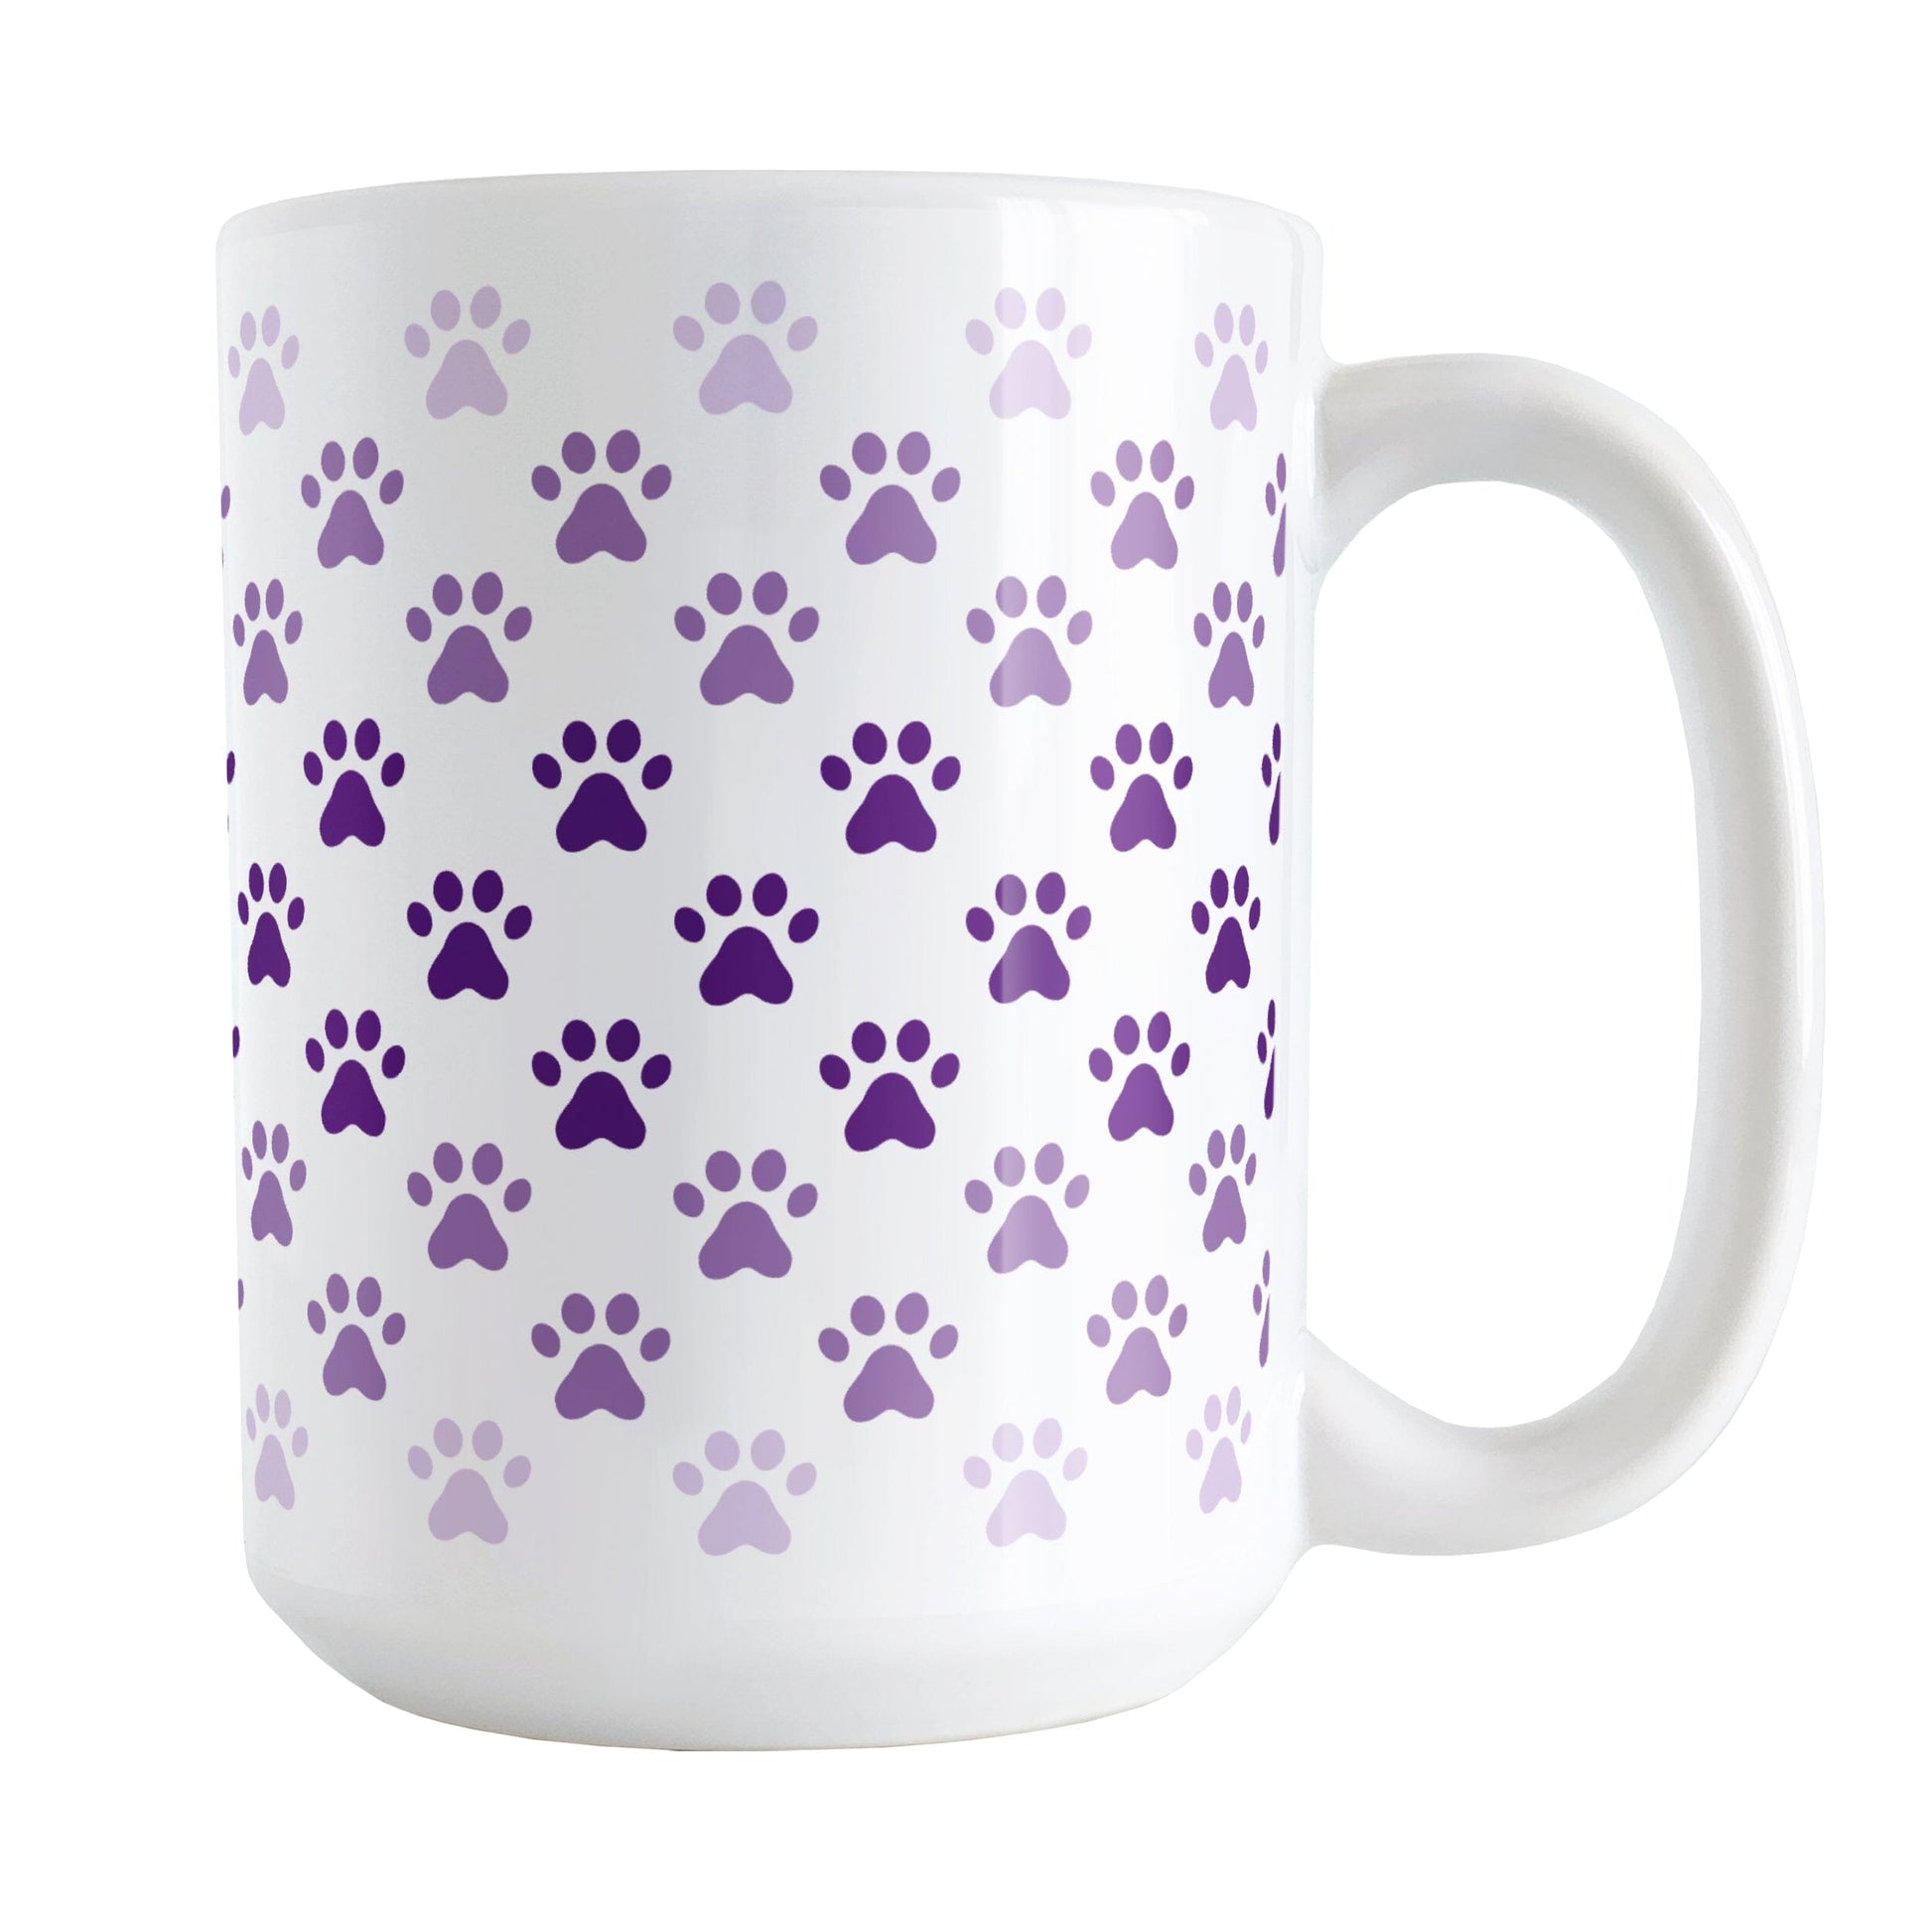 Paw Prints in Purple Mug (15oz) at Amy's Coffee Mugs. A ceramic coffee mug designed with paw prints in different shades of purple, with the darker purple color across the middle and the lighter purple along the top and bottom, in a pattern that wraps around the mug to the handle.